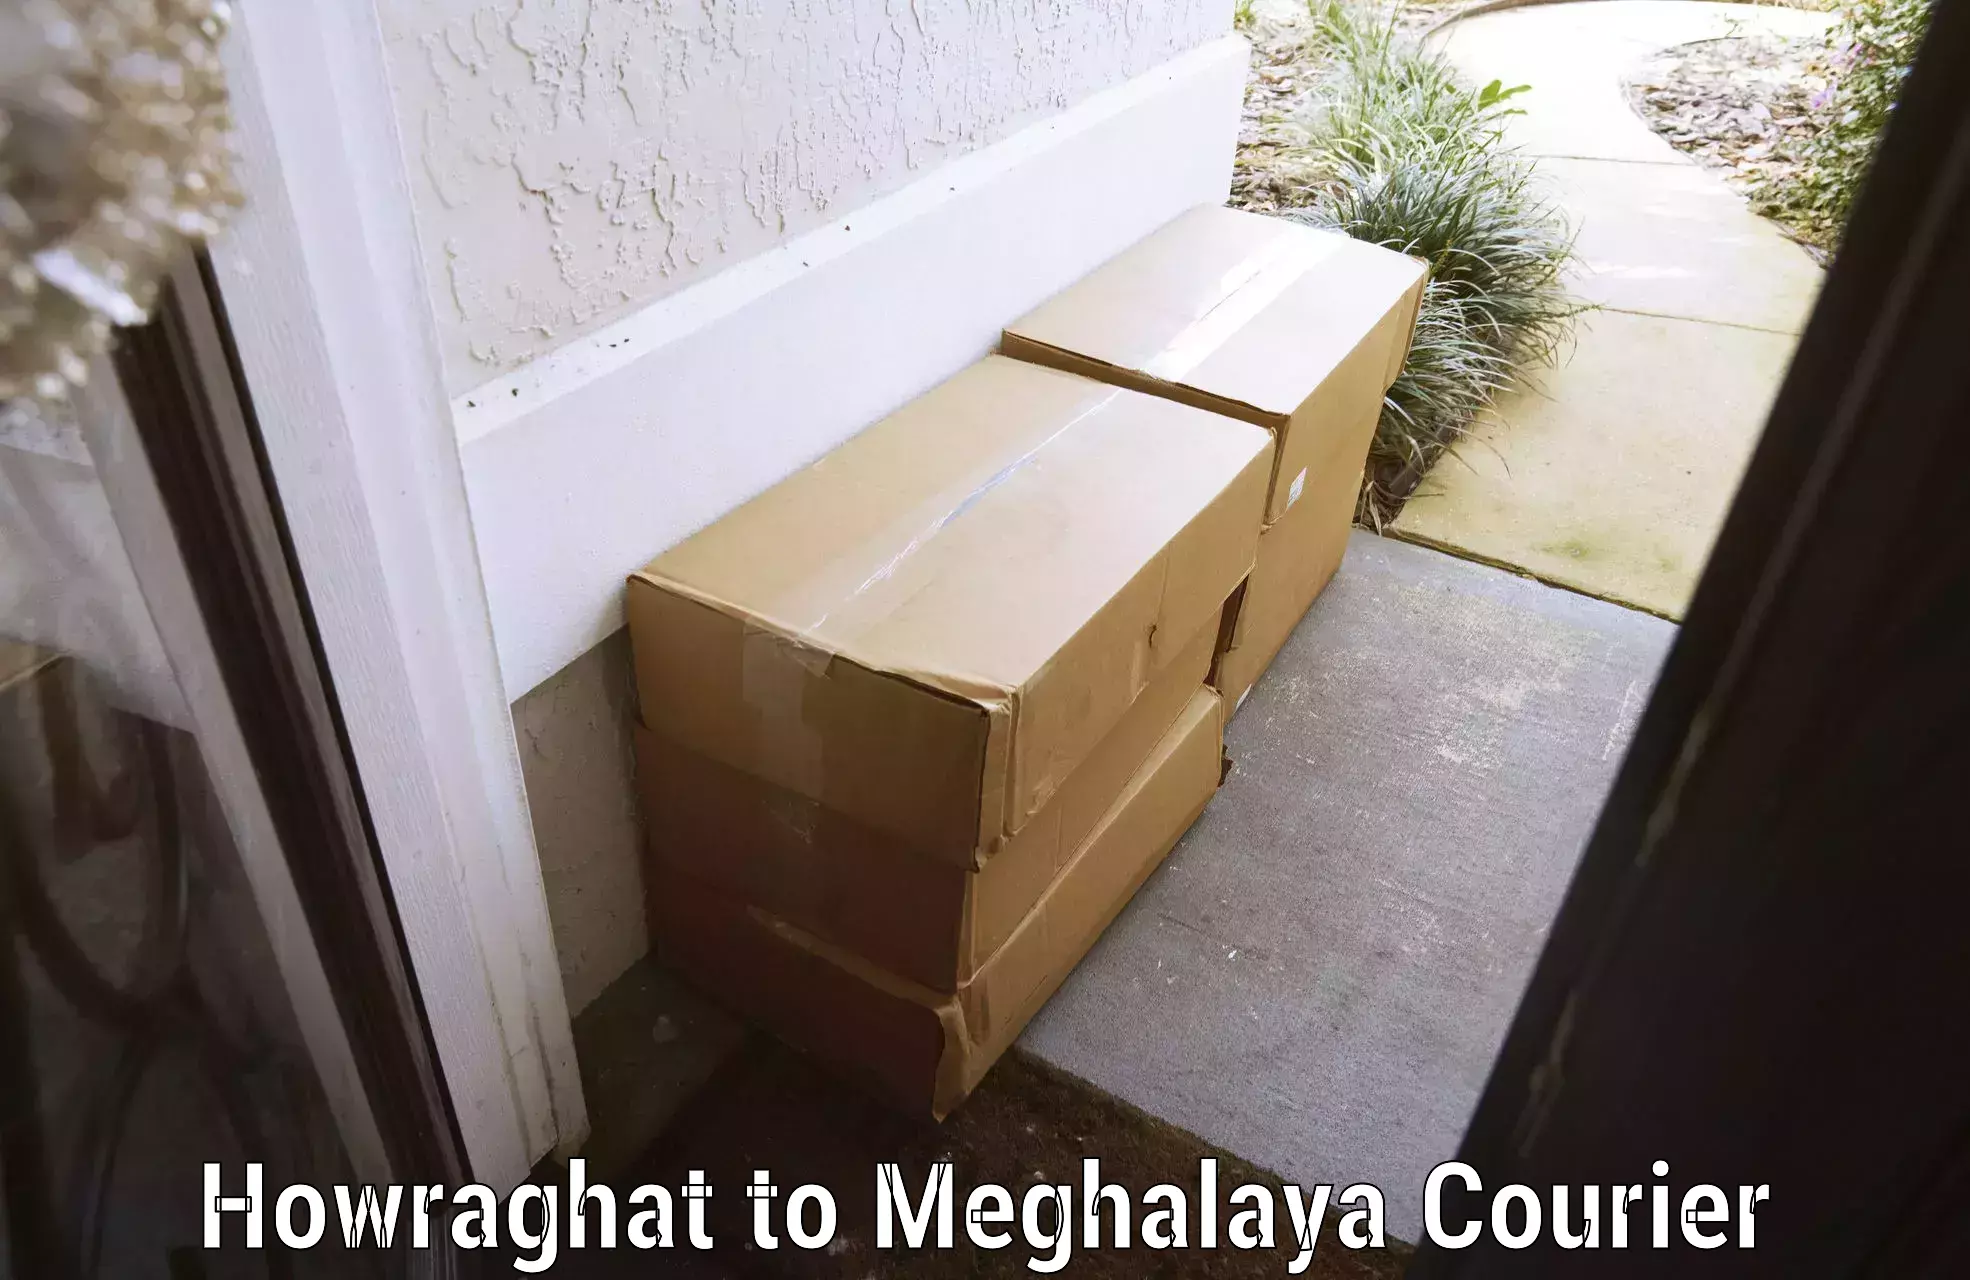 Hassle-free luggage shipping Howraghat to Williamnagar